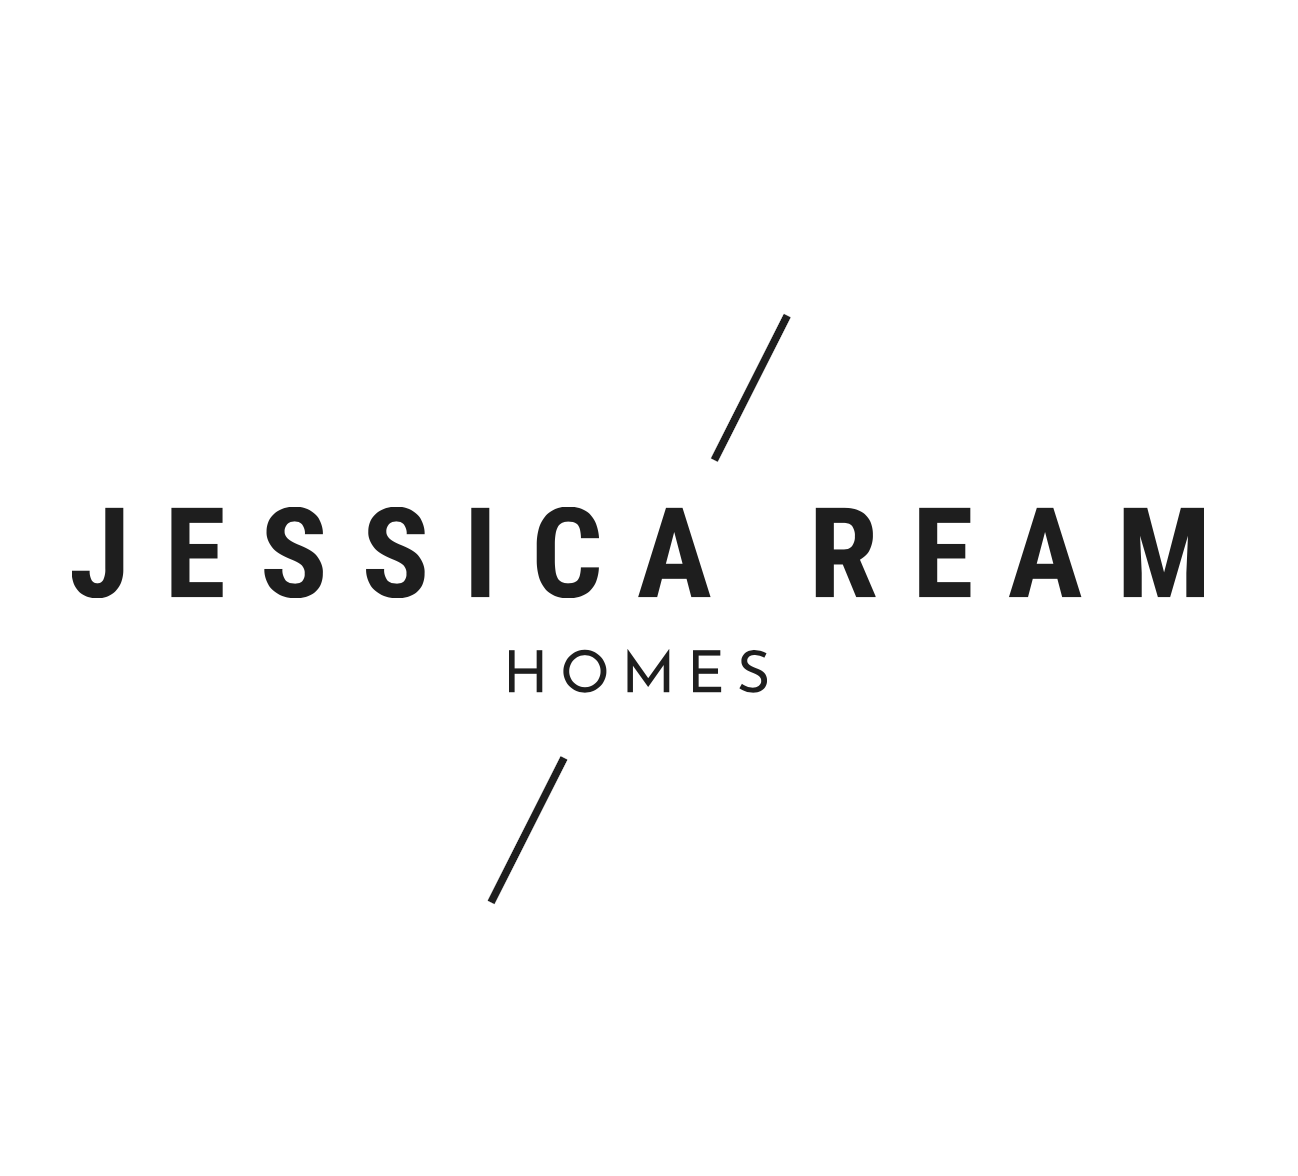 Jessica Ream Homes, Thursday, March 31, 2022, Press release picture